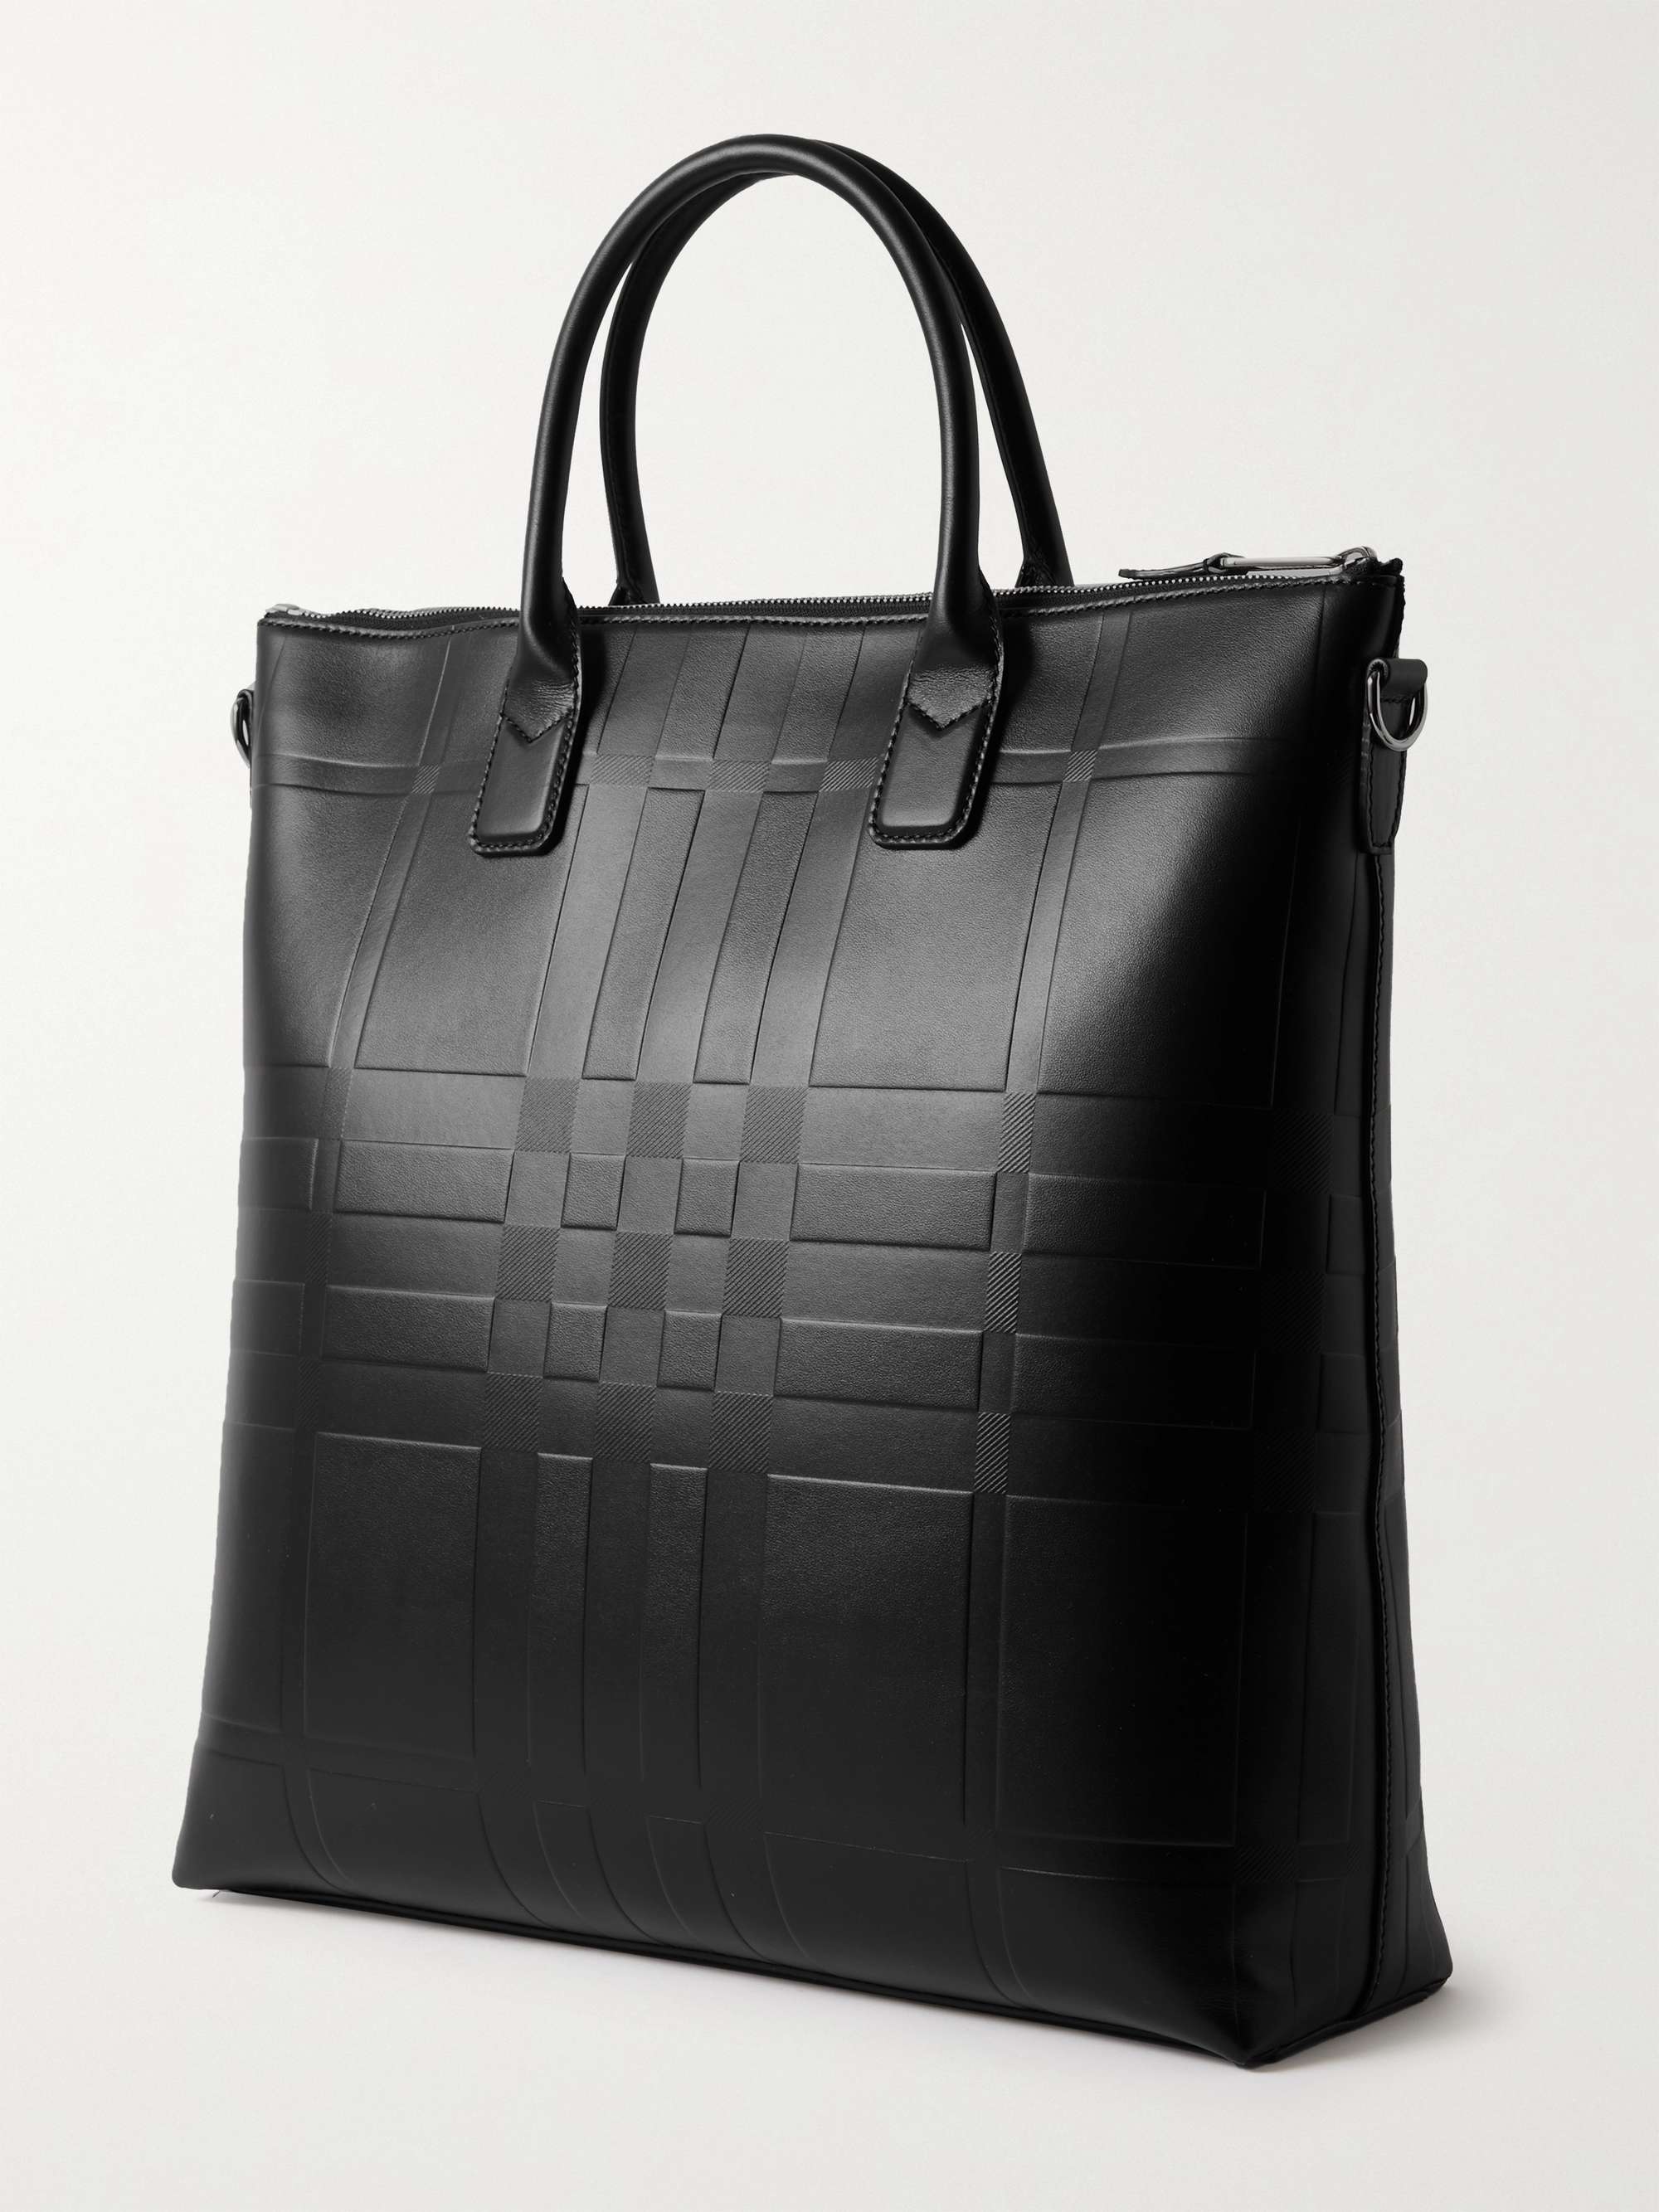 BURBERRY Embossed Leather Tote Bag